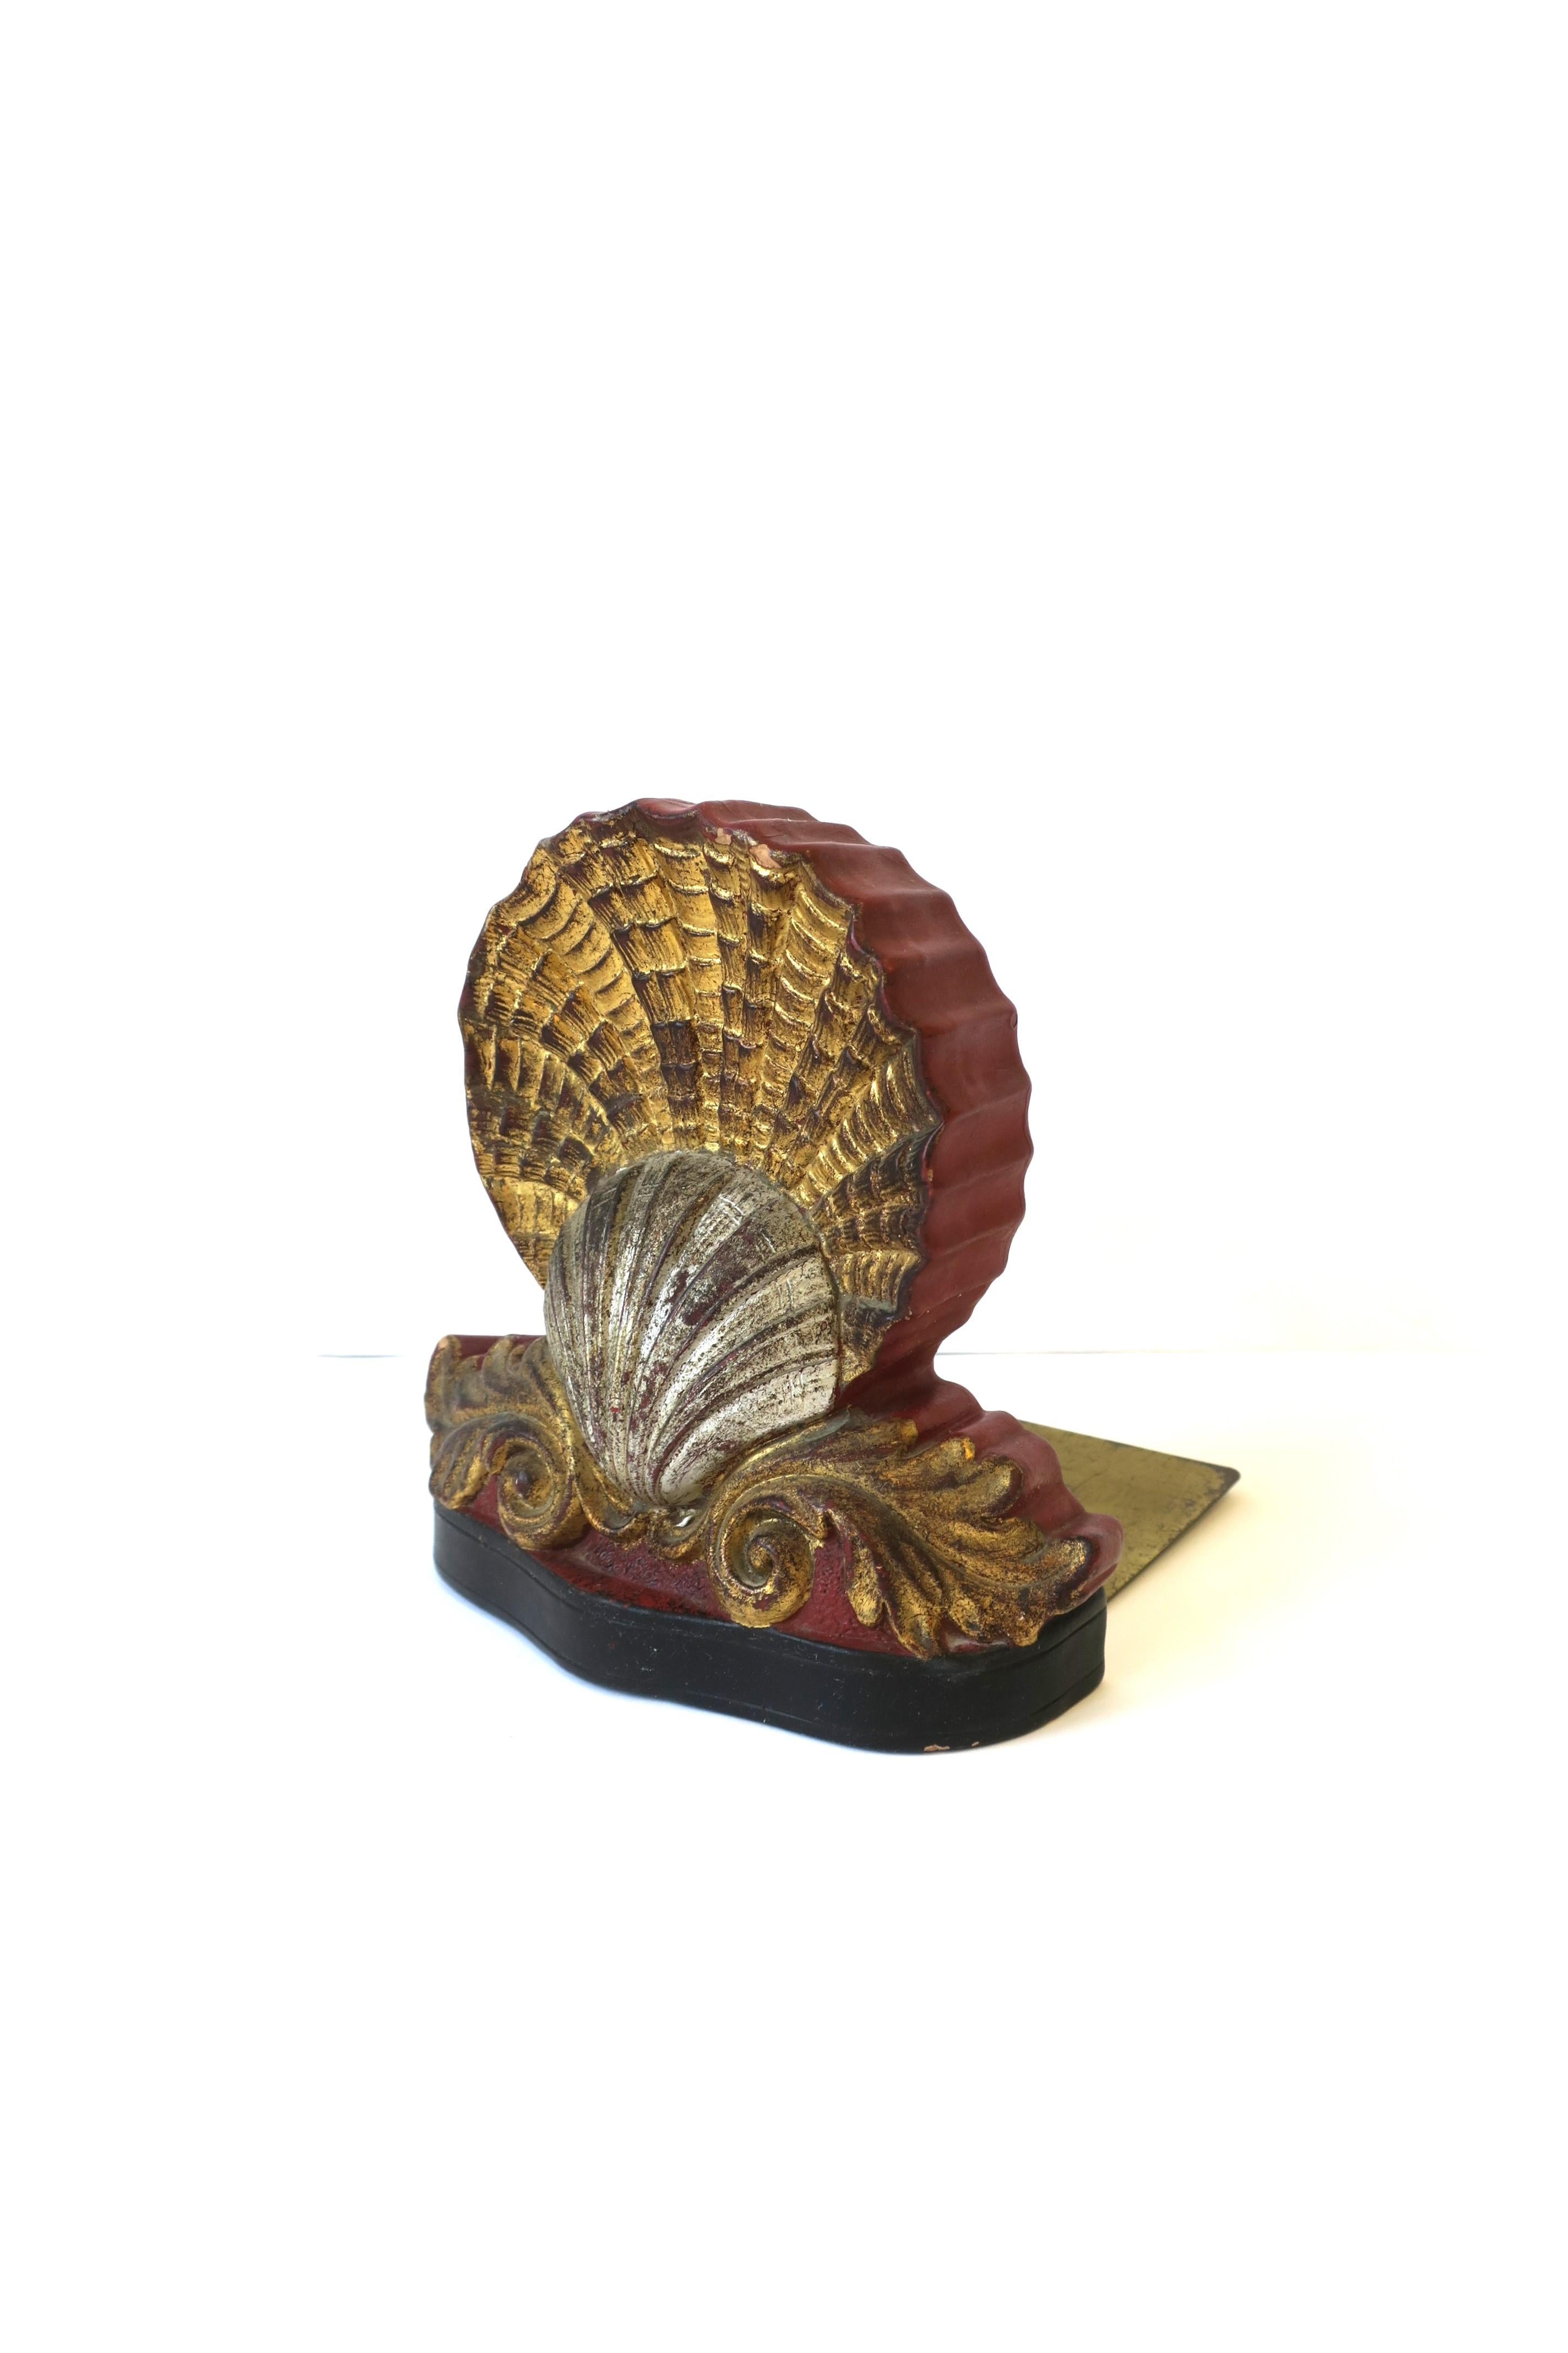 Italian Scallop Seashell Bookend Gold and Silver Gilt, circa 20th Century In Good Condition For Sale In New York, NY